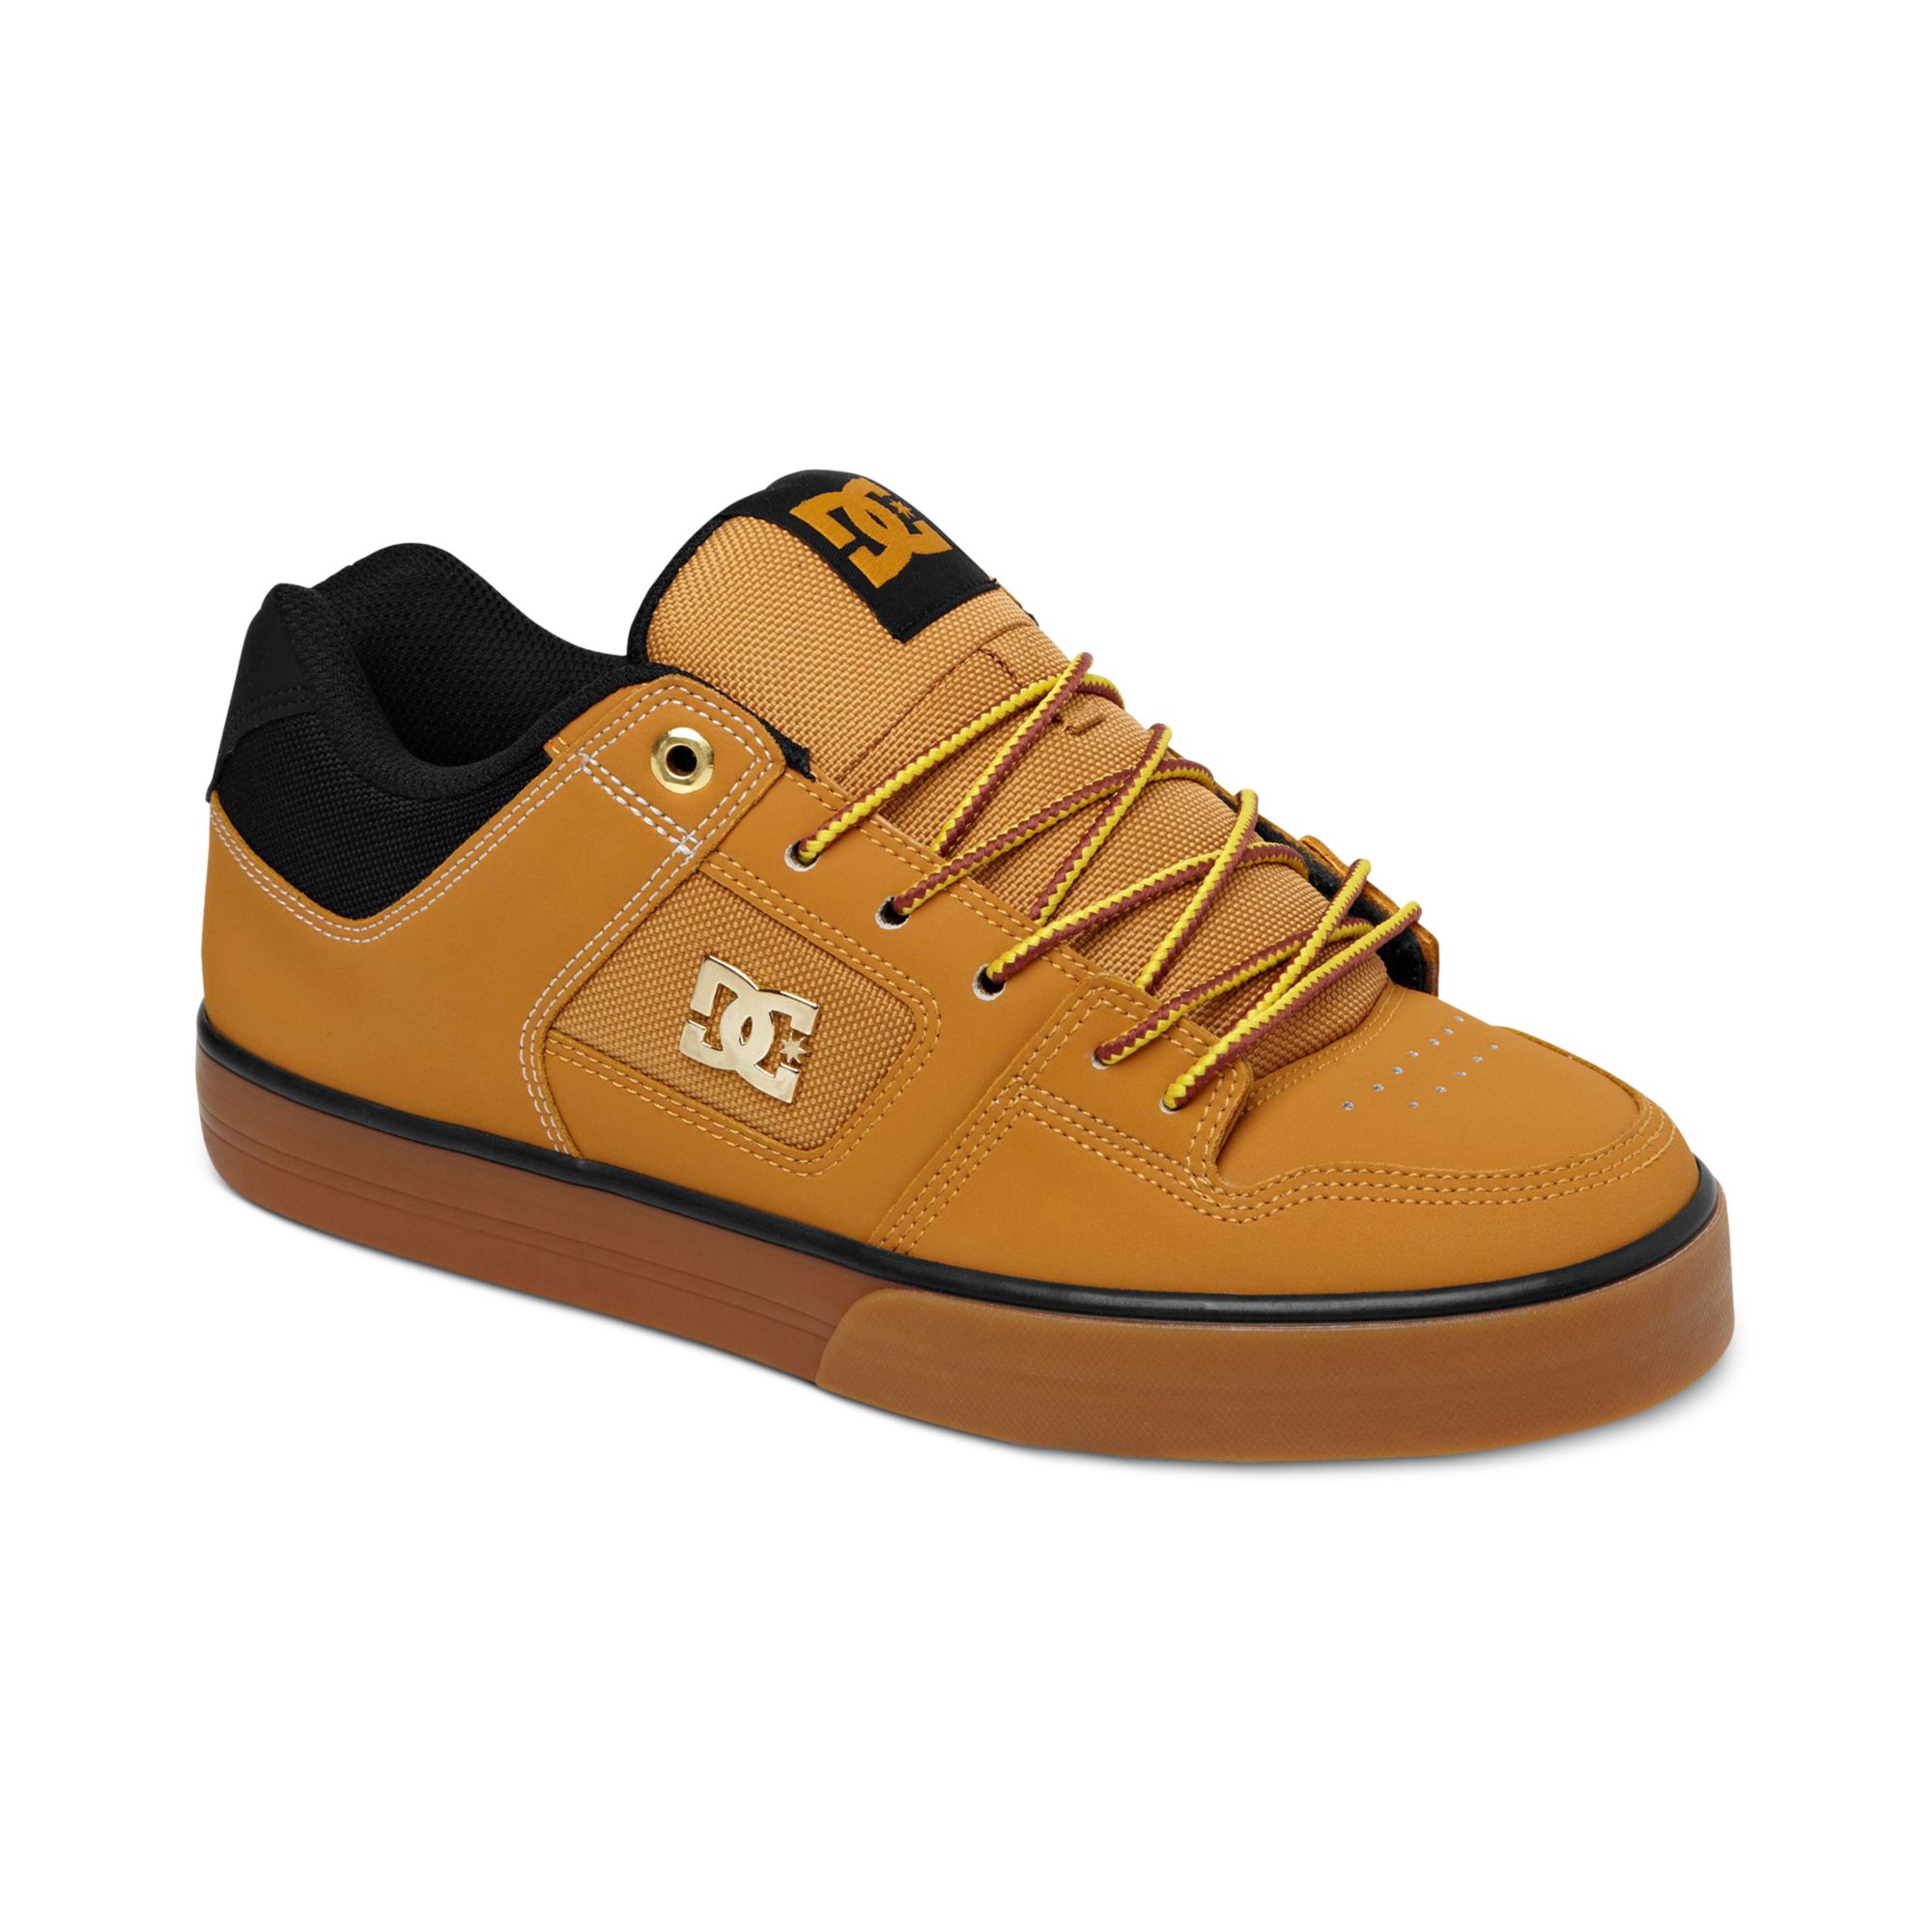 dc brown shoes